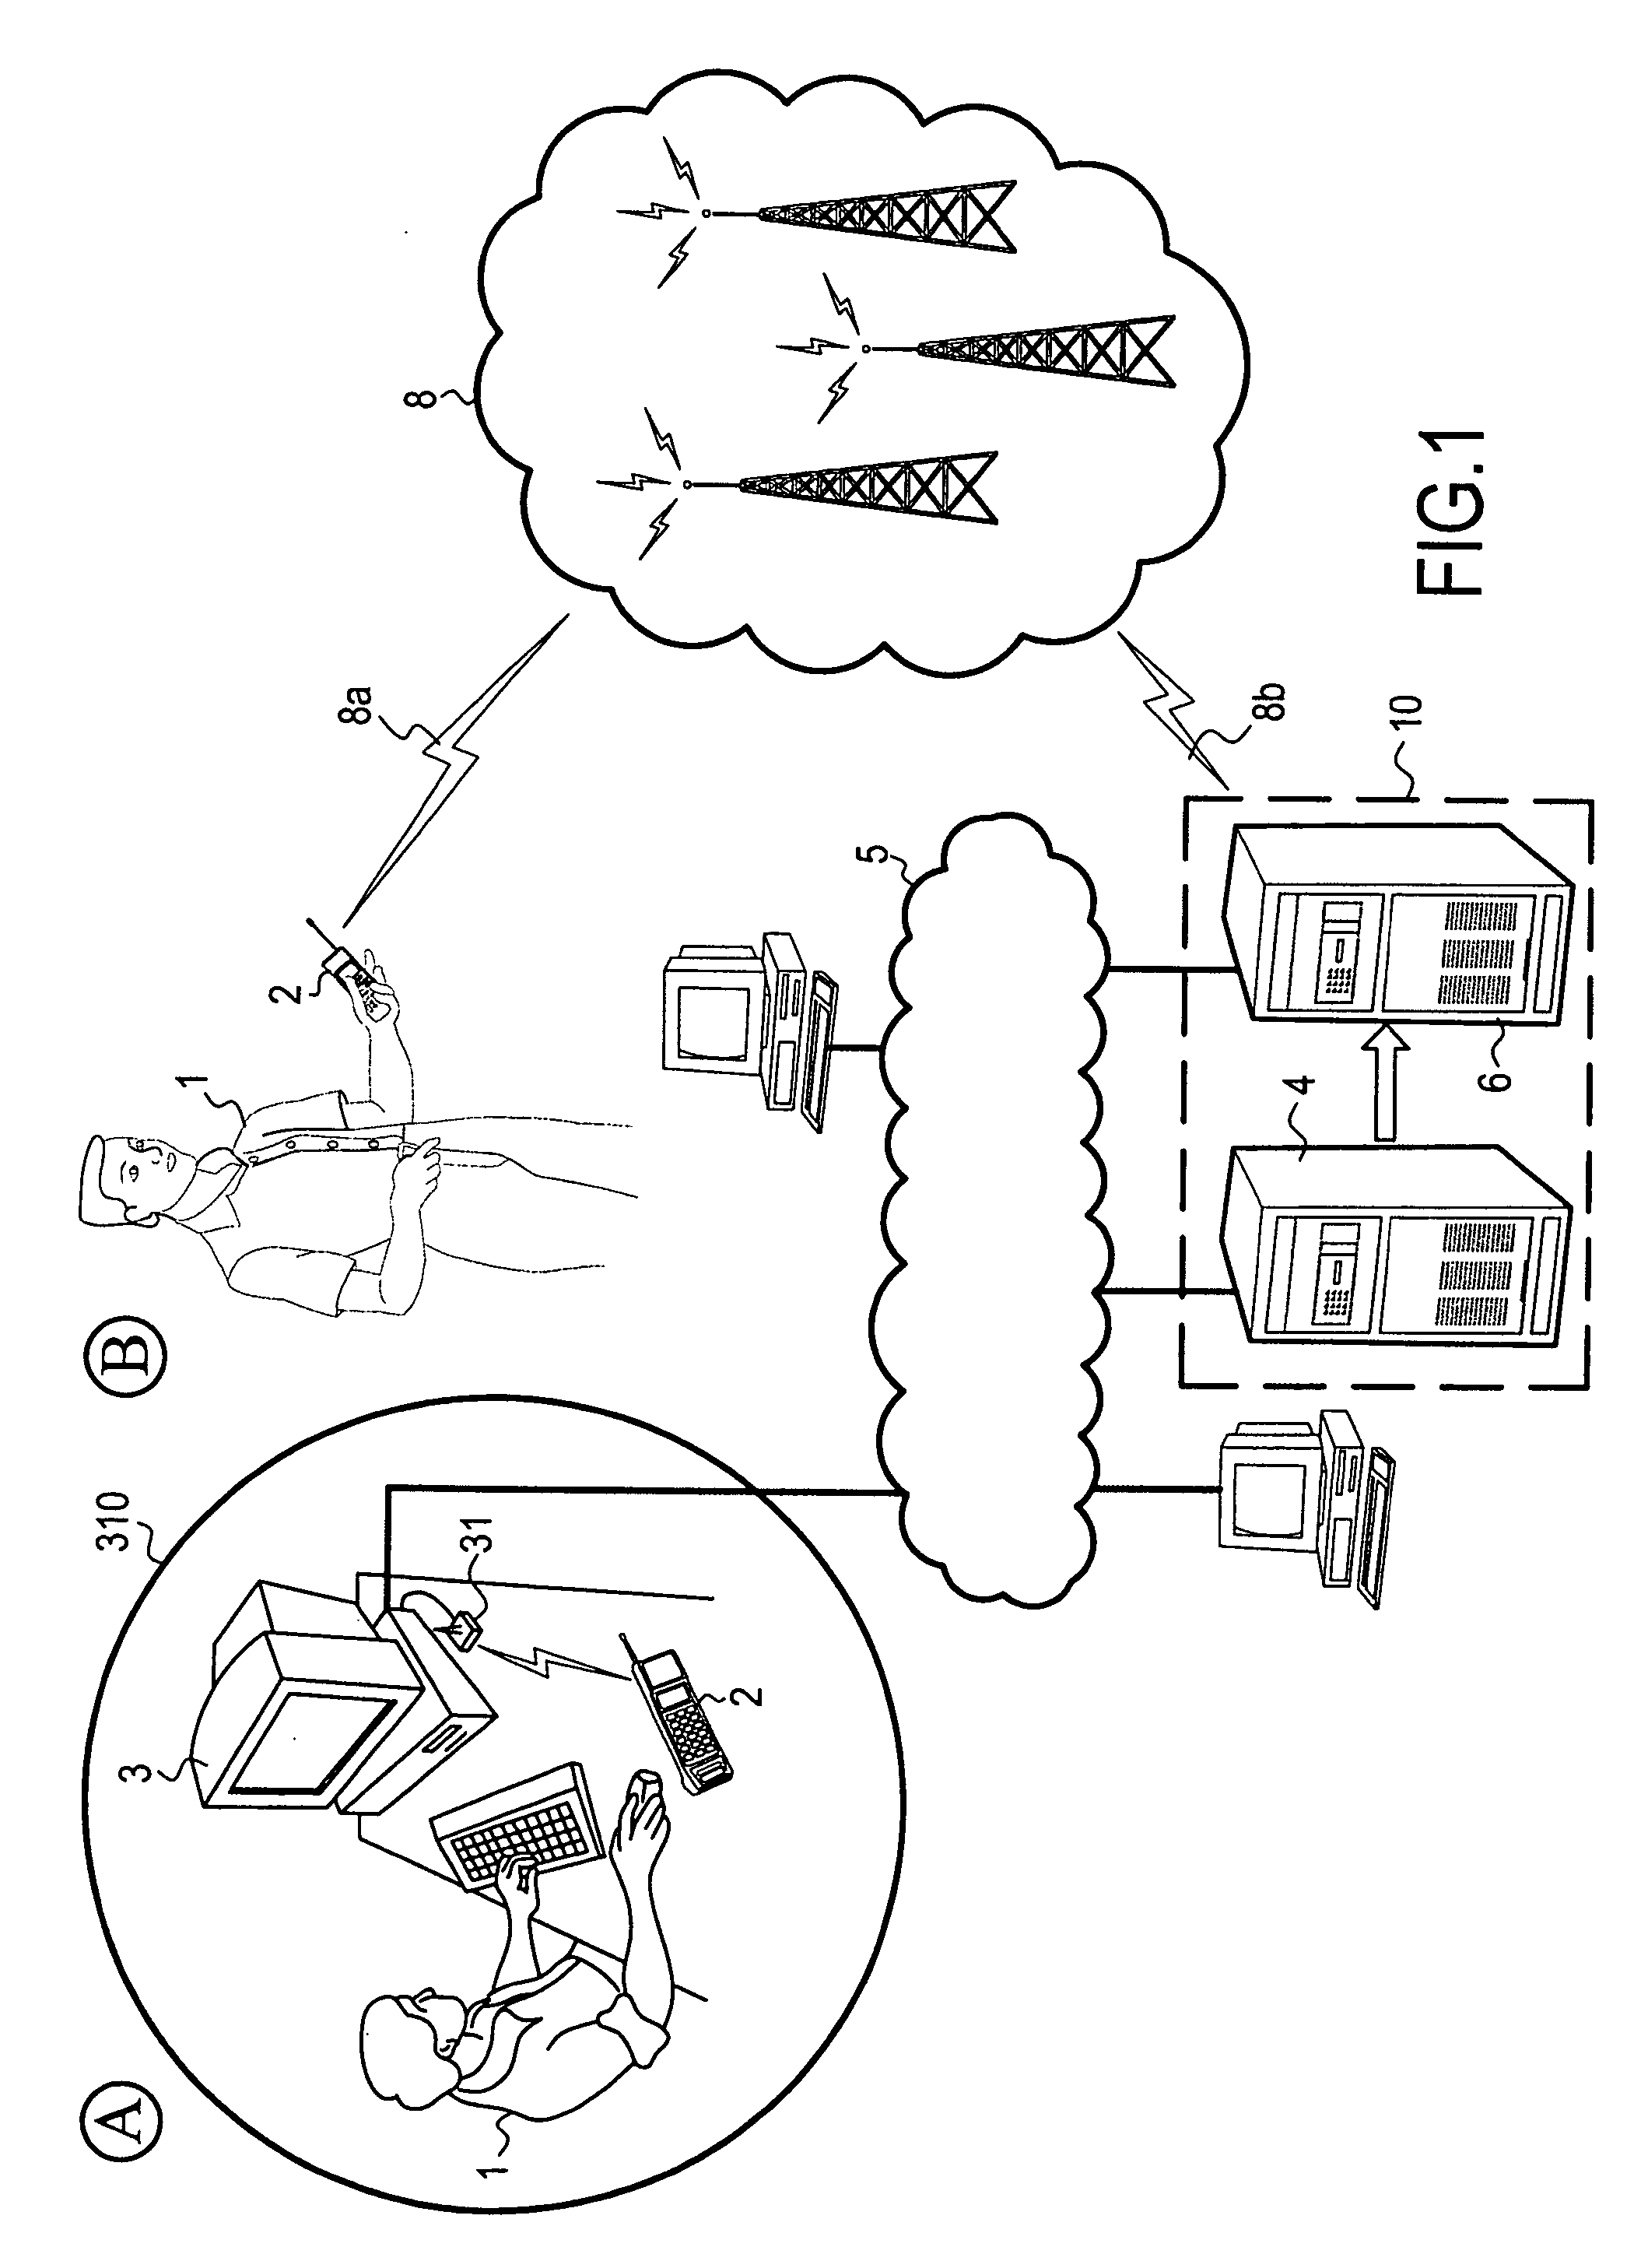 Method and a system for automatically activating and deactivating a service